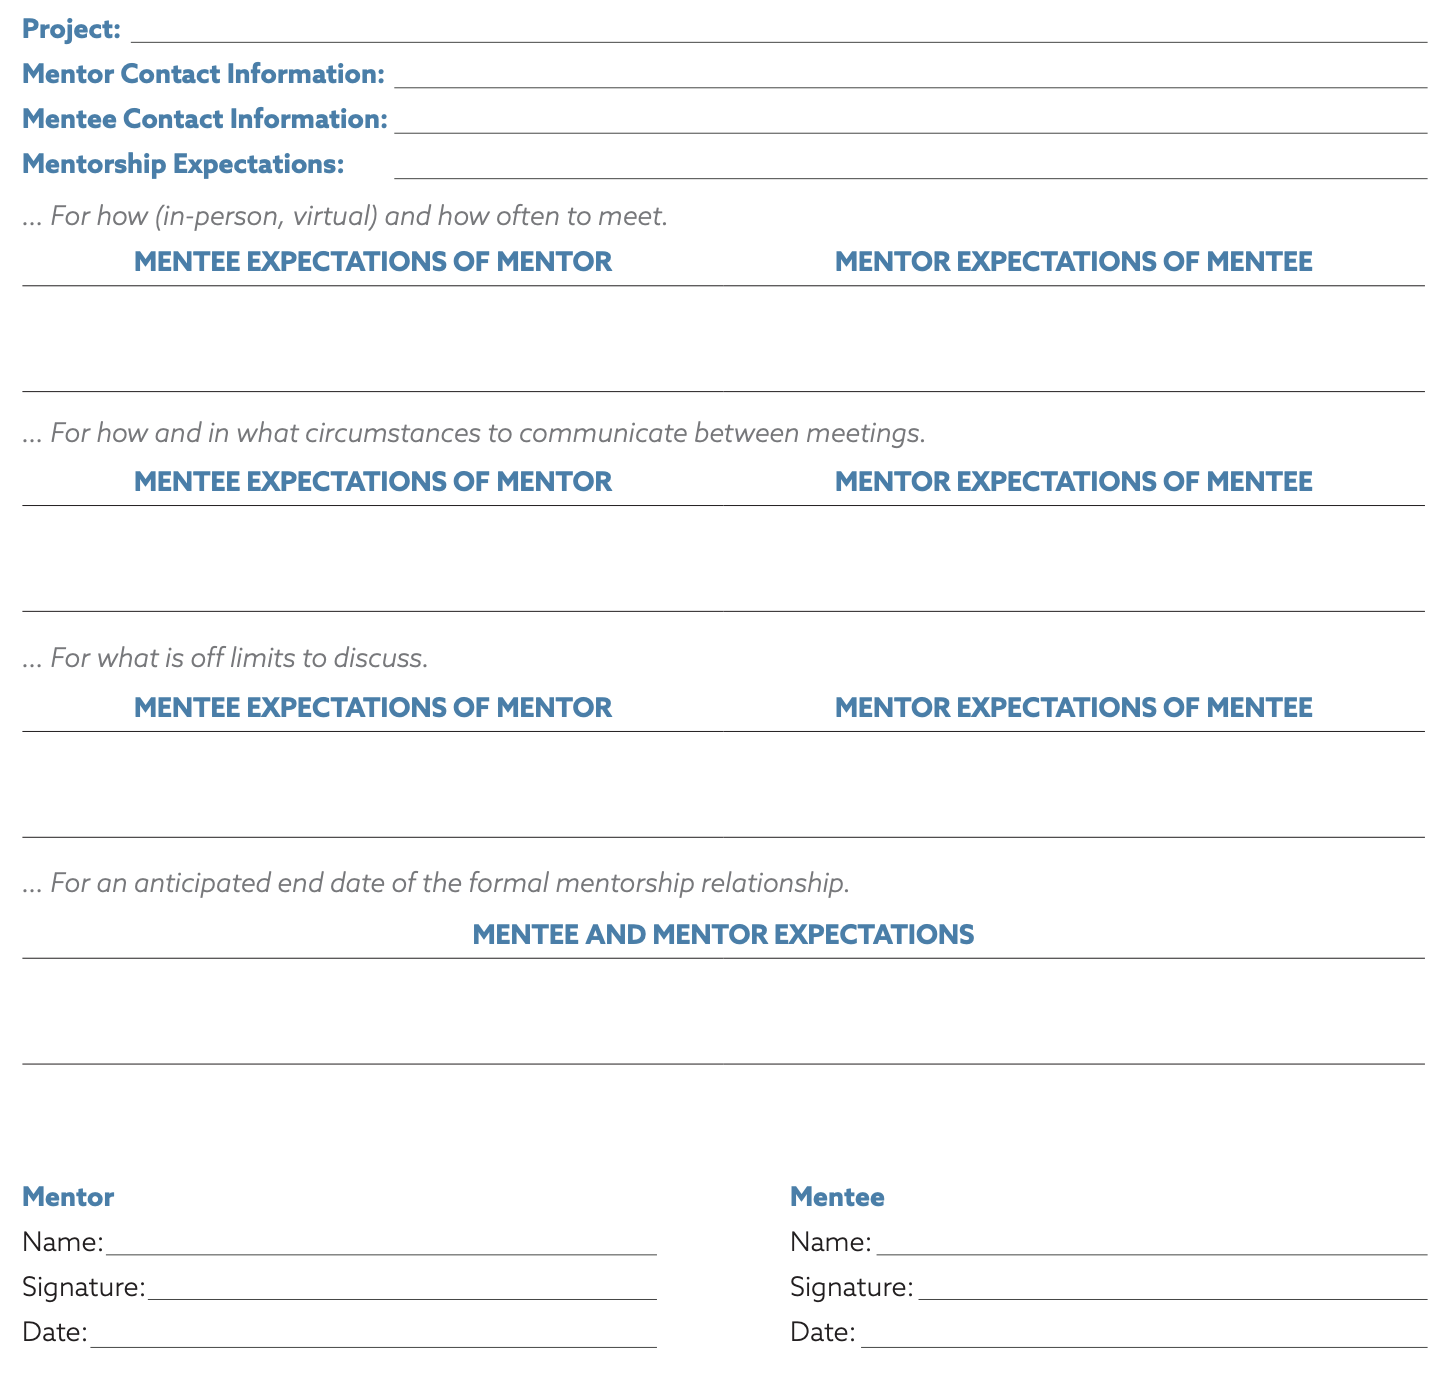 A form for the mentor and mentee to complete and sign.  Includes space to indicate: project name, mentor contact information, mentee contact information, mentorship expectations, how and how often to meet, how and in what circumstances to communicate between meetings, what is off-limits to discuss, and an anticipated end date of the formal mentorship relationship. 